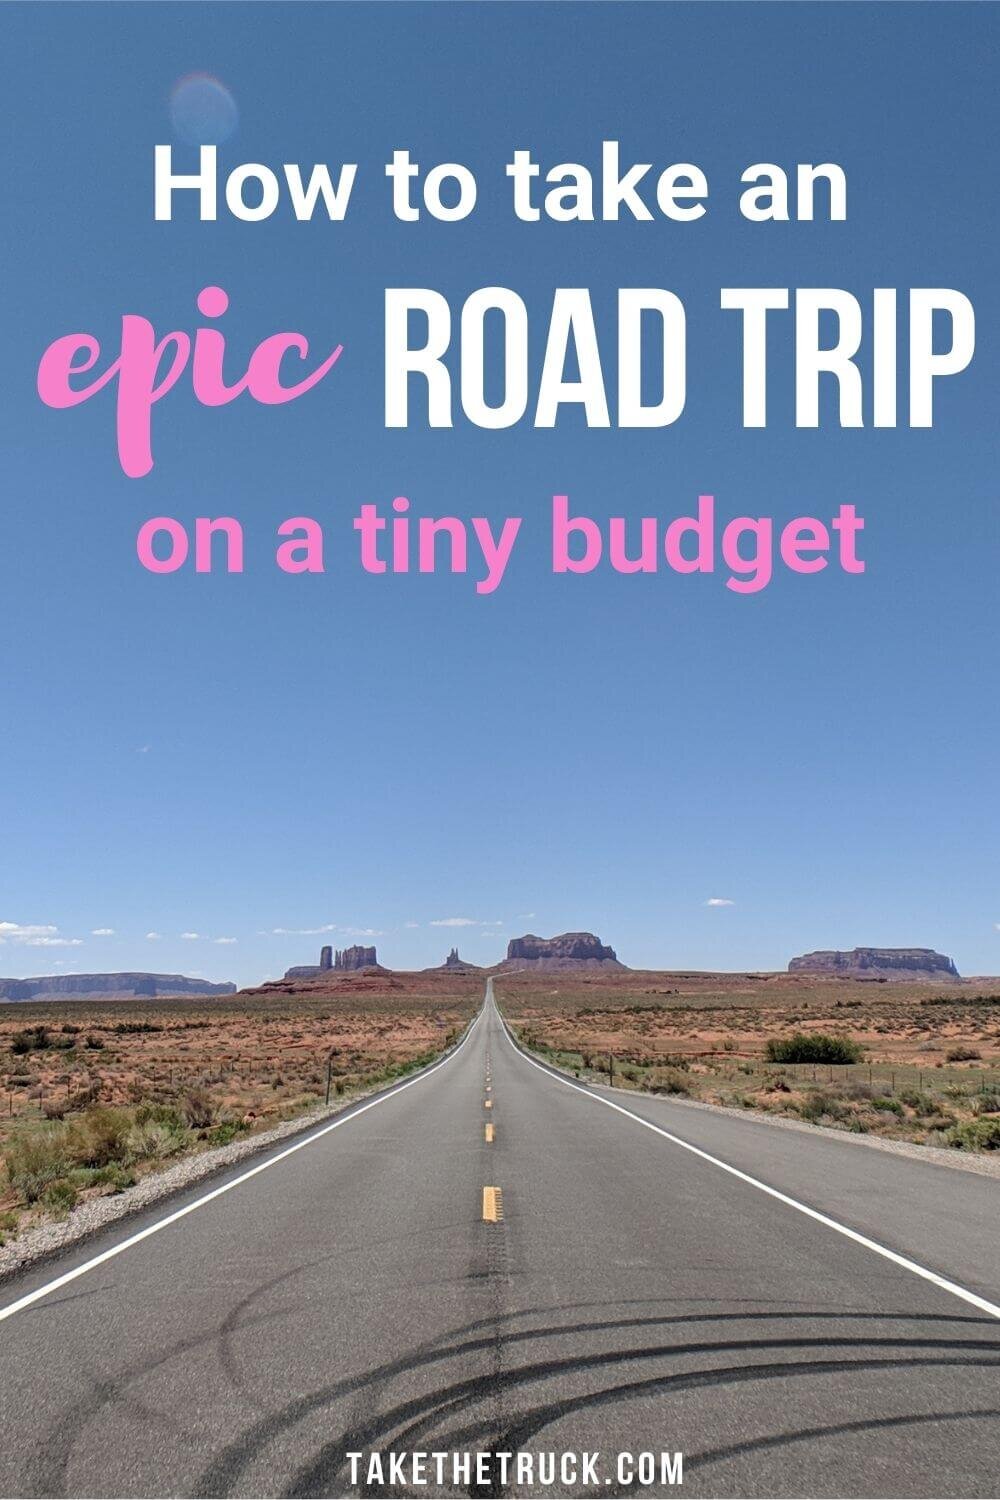 Looking for budget road trip tips and info on how to plan a cheap cross country road trip on a budget? This post gives our top 10 budget road trip tips to save money on your road trip adventure!